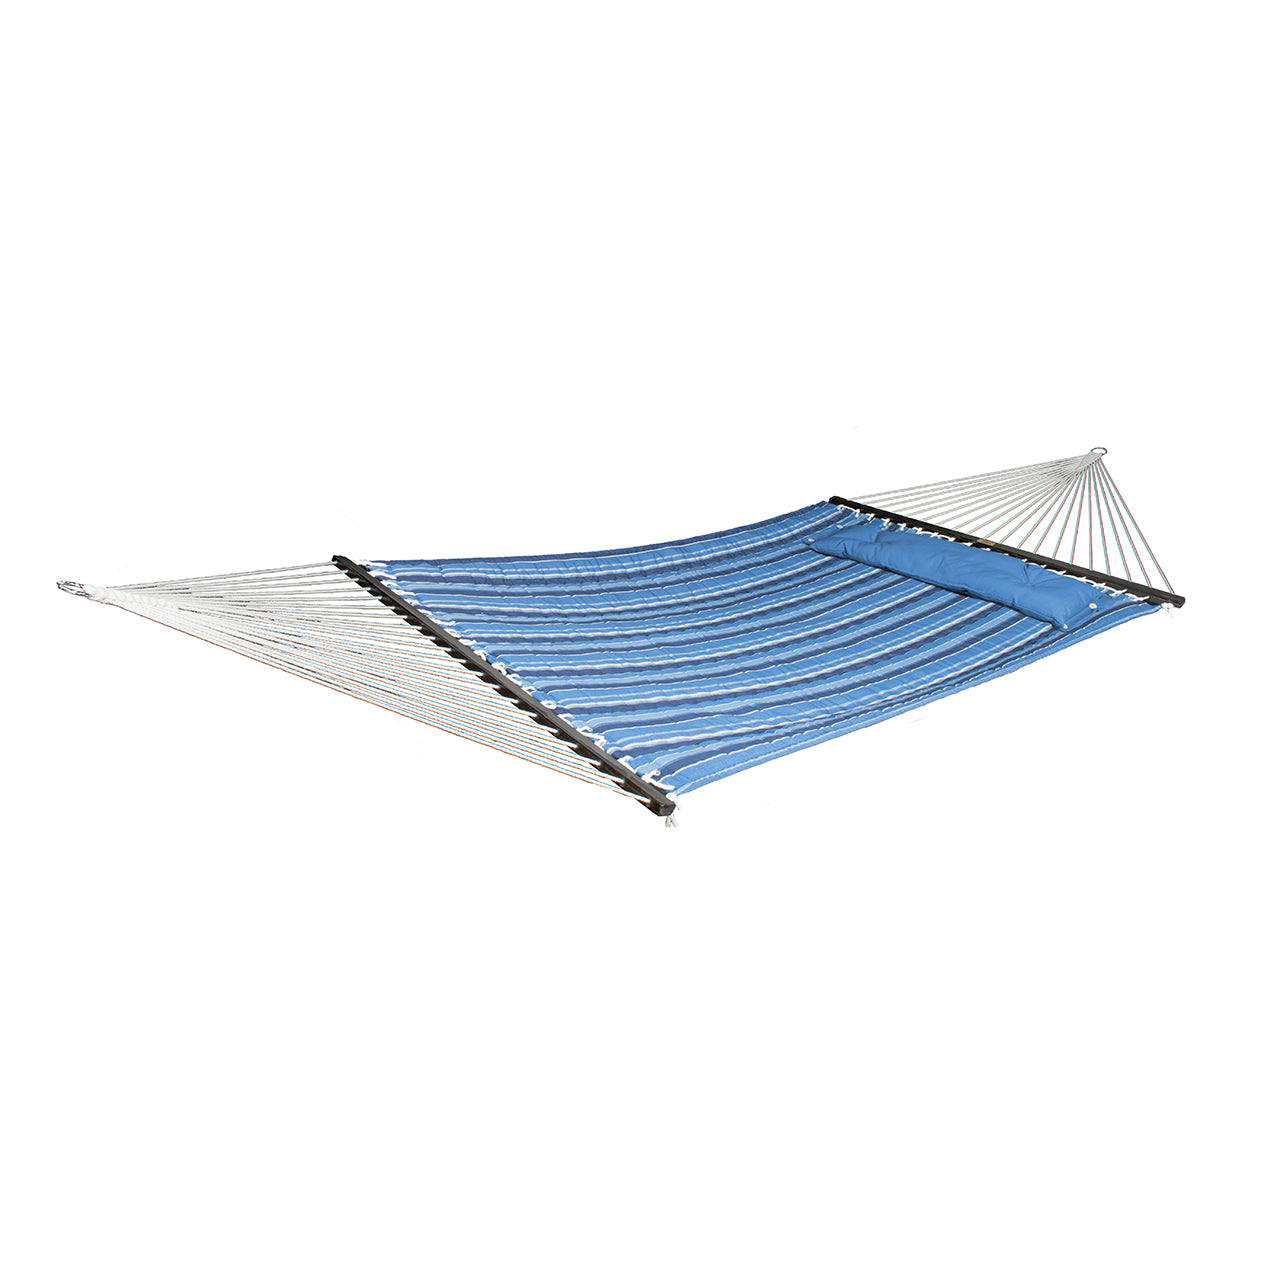 Bliss Hammocks 55-inch Wide 2-Person Reversible Quilted Hammock with Spreader Bars and a Pillow in the blue stripe / solid blue variation showing the blue striped side.